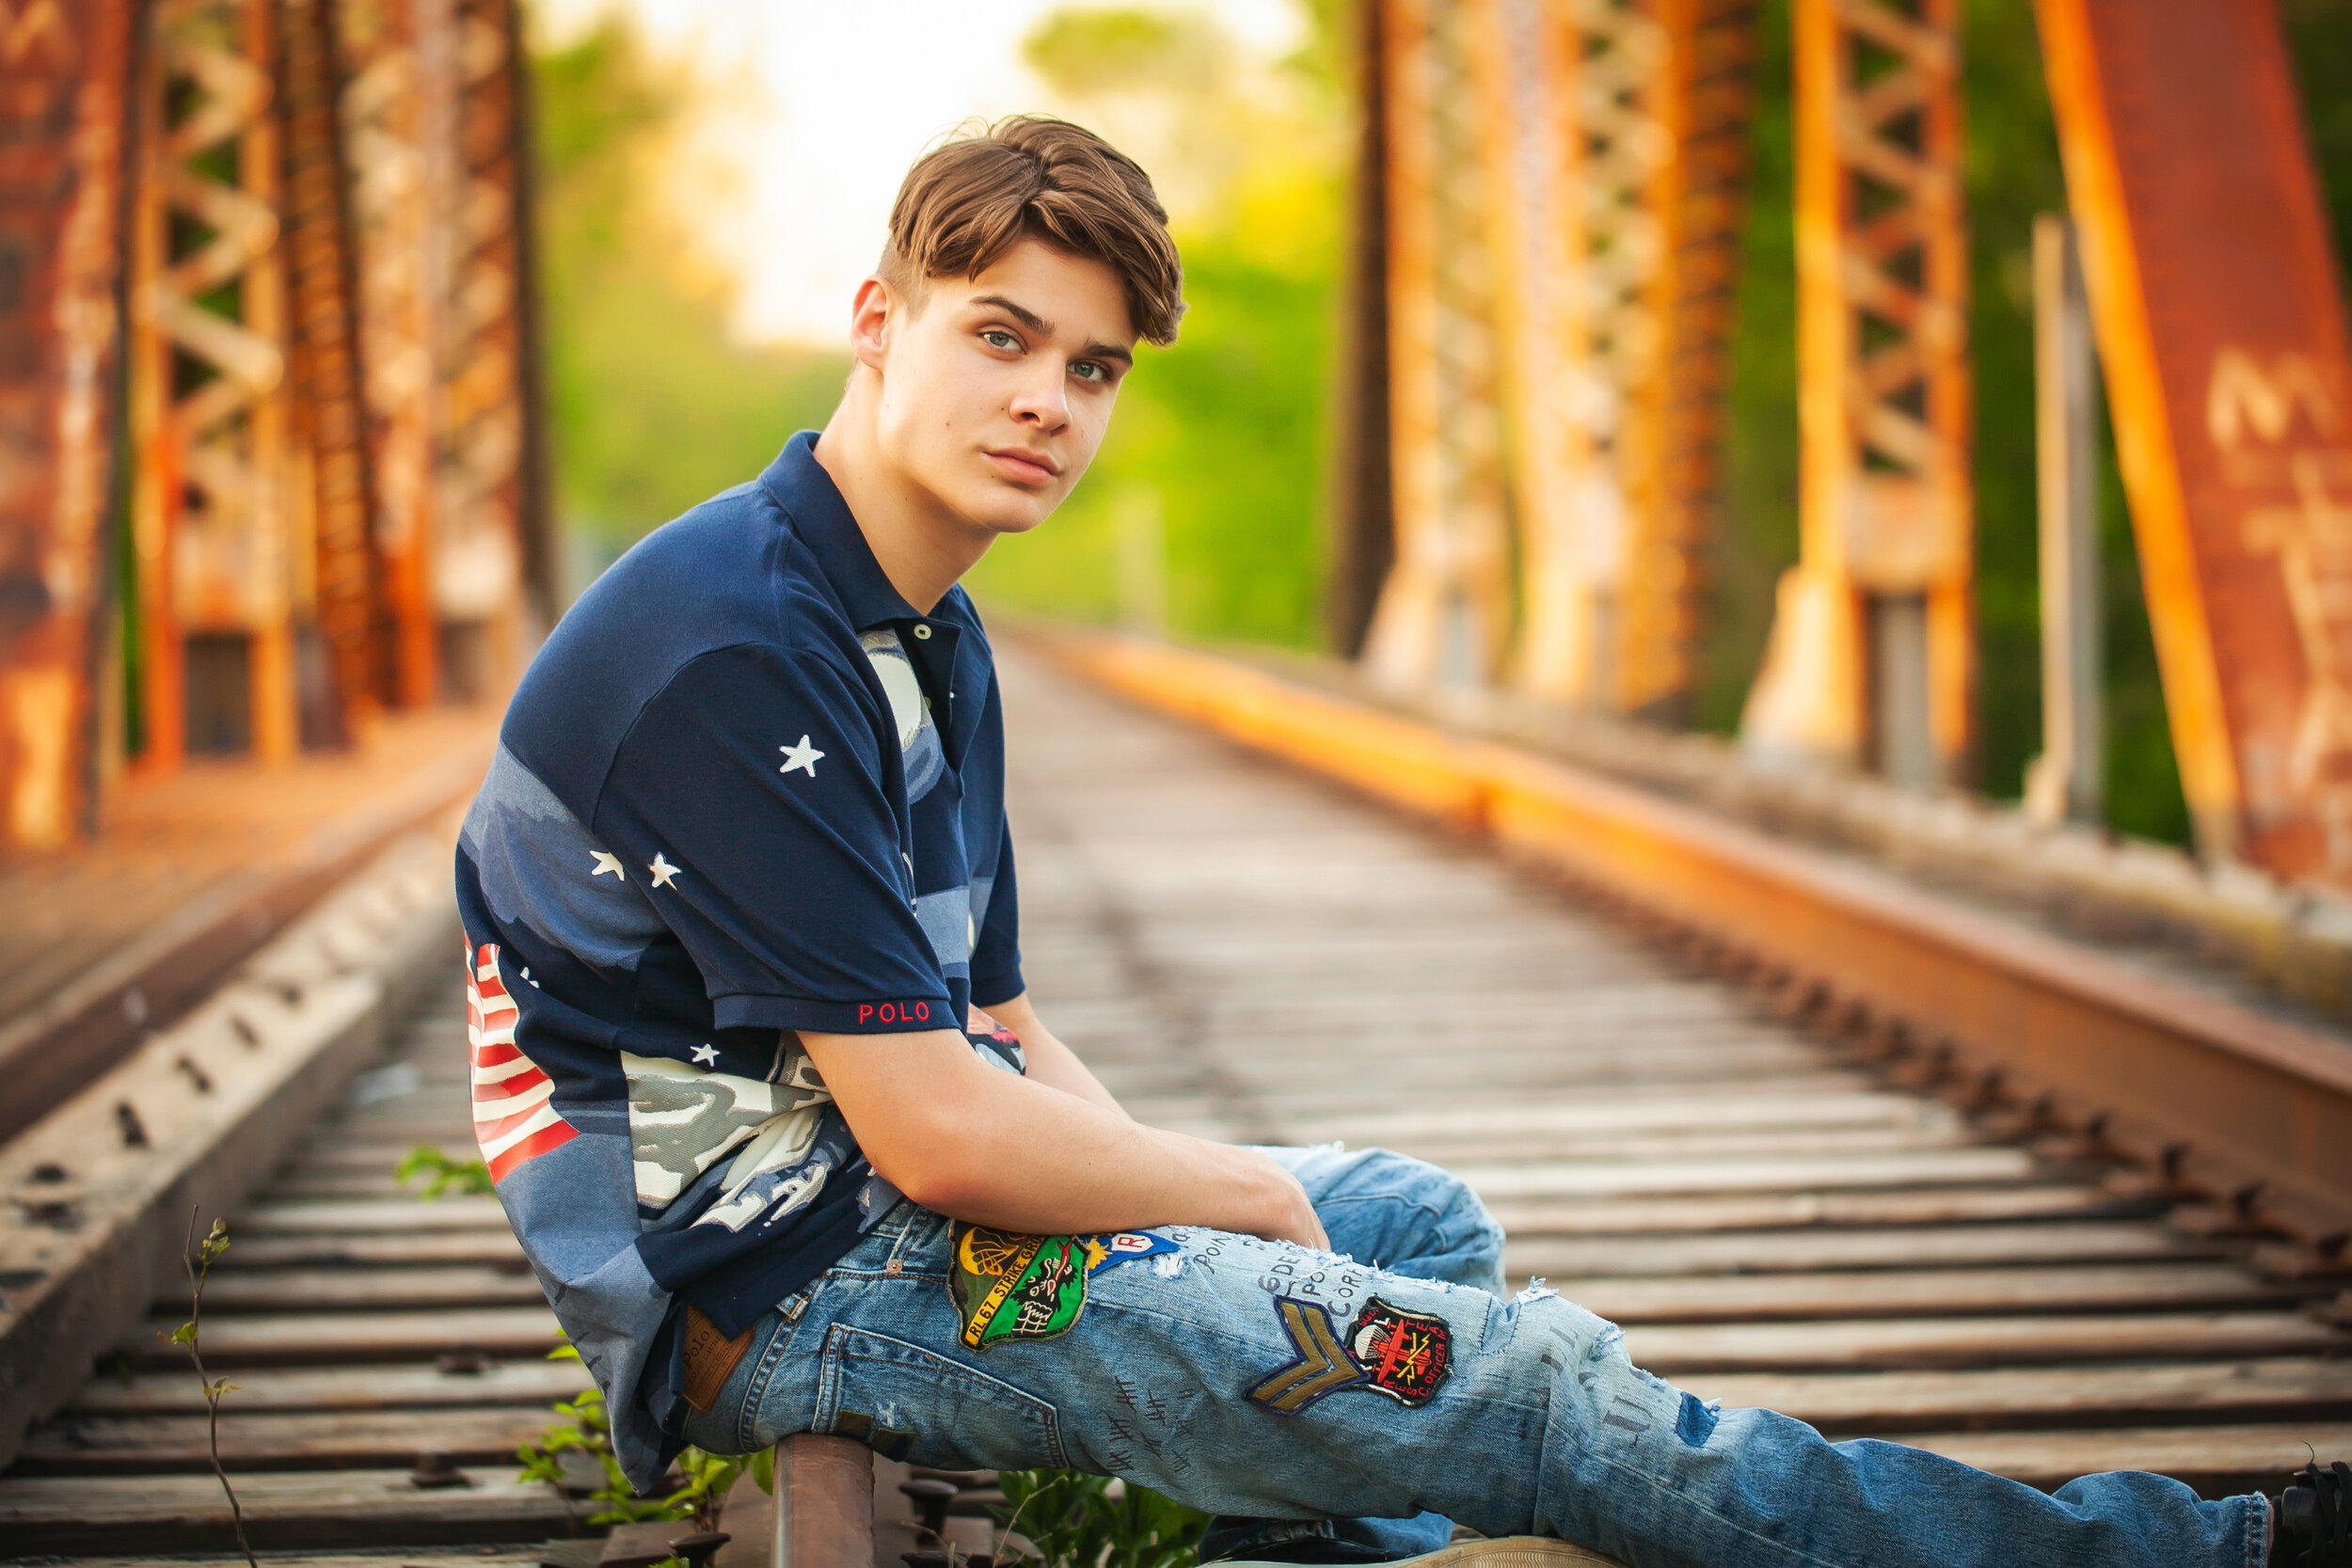 senior-guys-pictures-photographer-abandoned-railroad-tracks-casual-cool-locations-for-senior-pictures-keller-texas-lacey-whitmer-photo-design